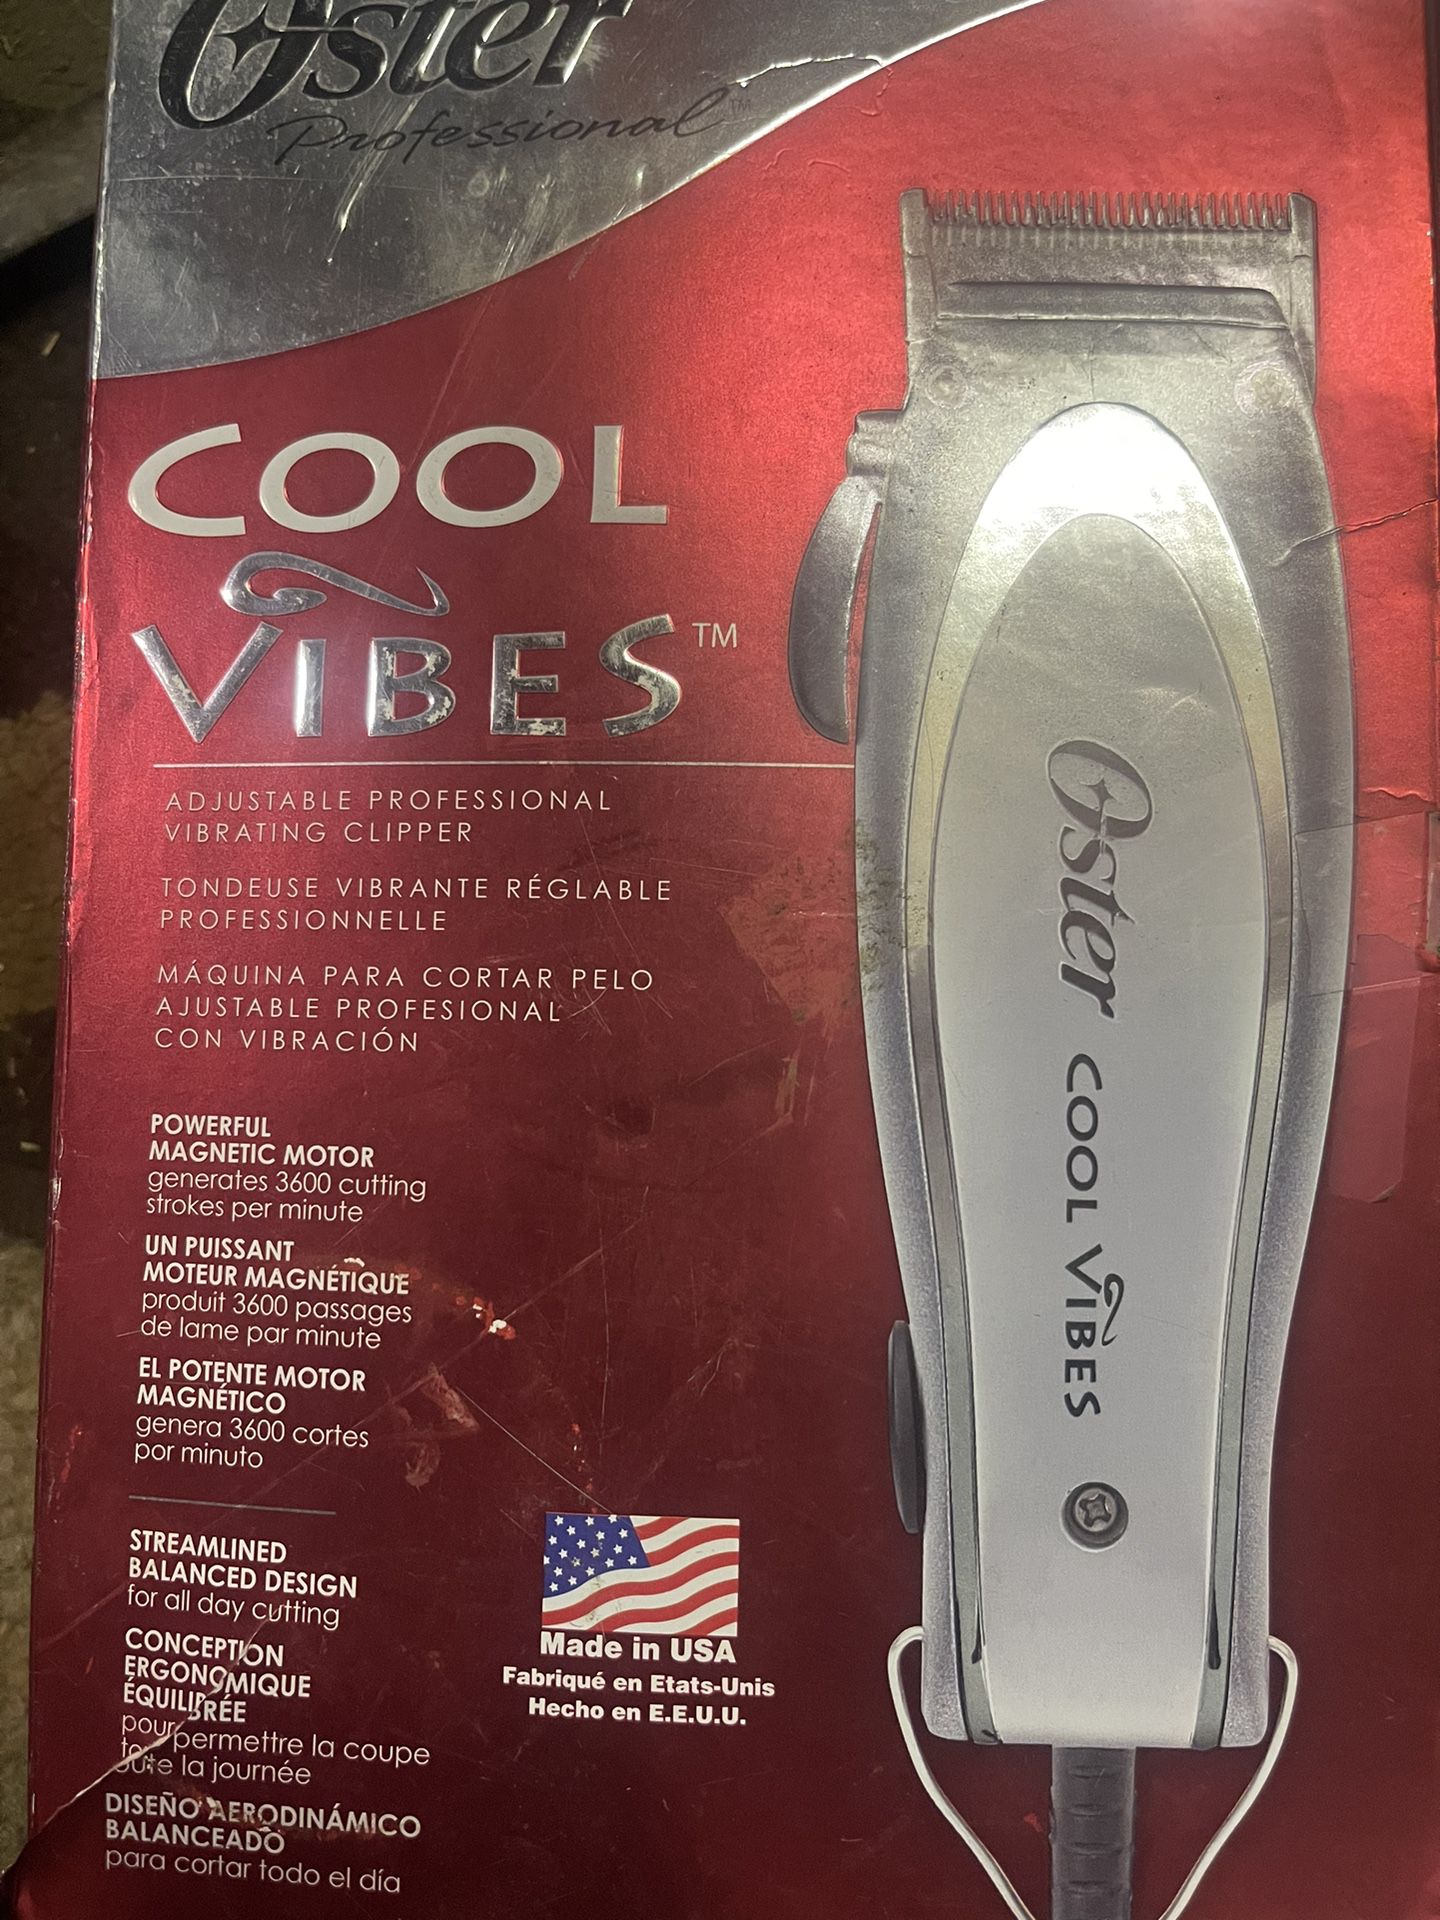 Oyster Cool VibeS clippers